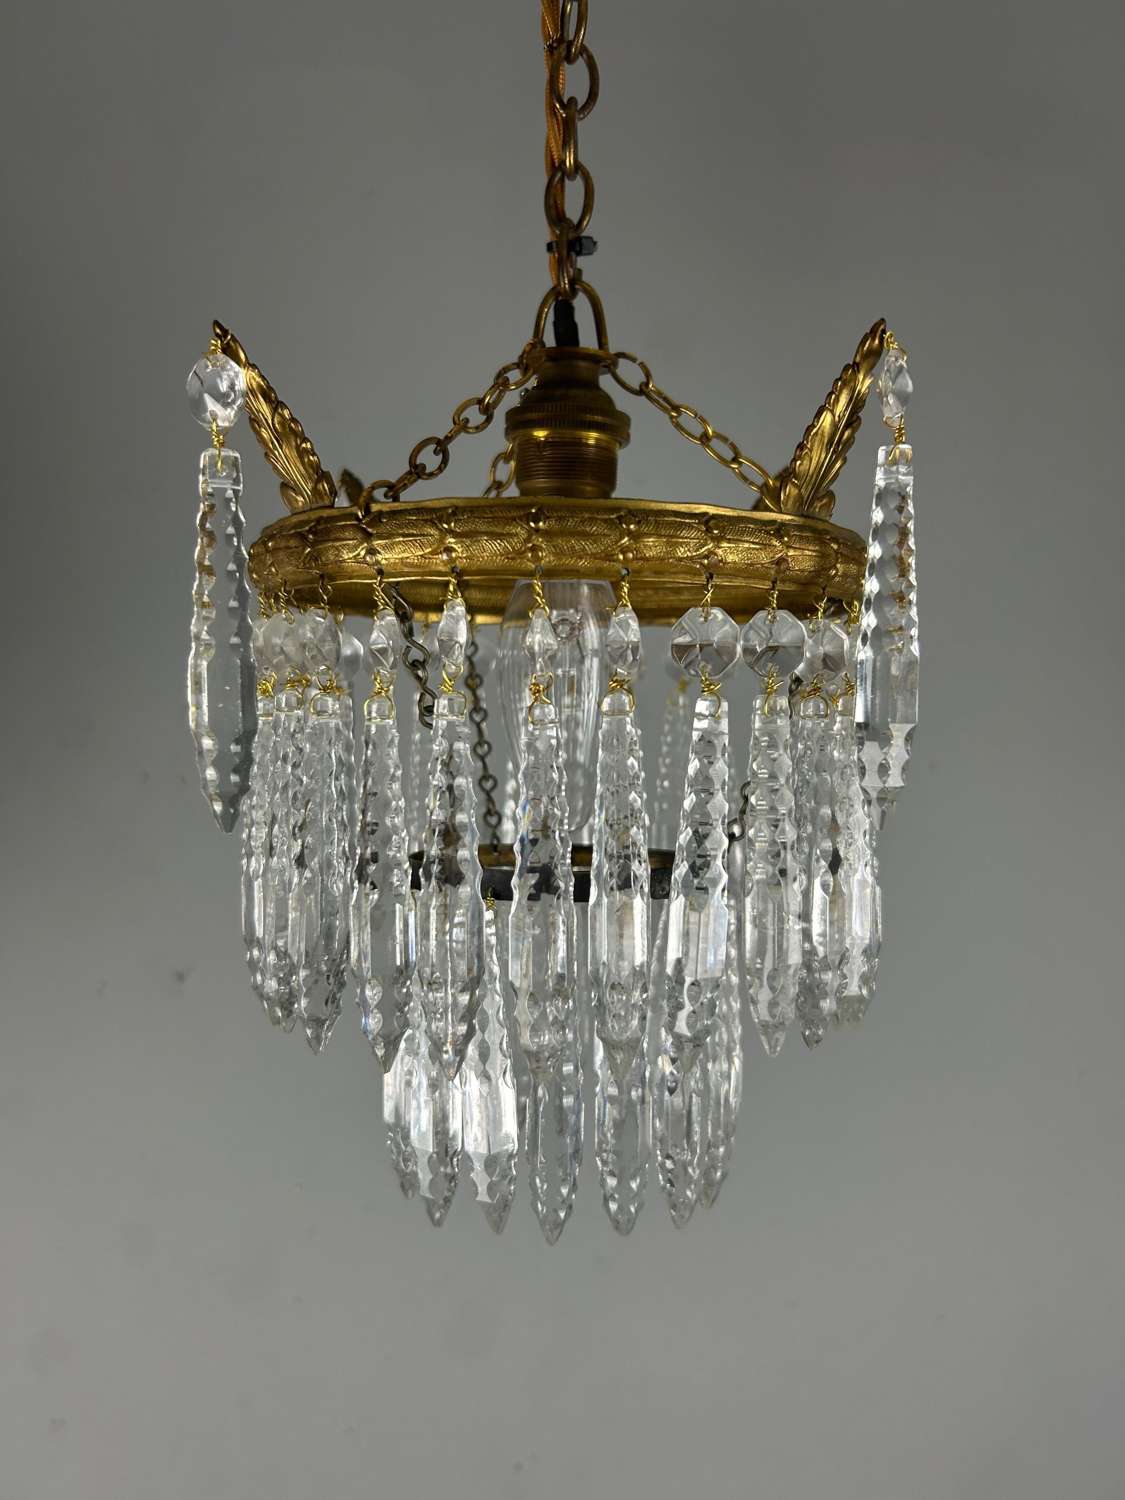 Two Tier Glass Chandelier, Ceiling Light